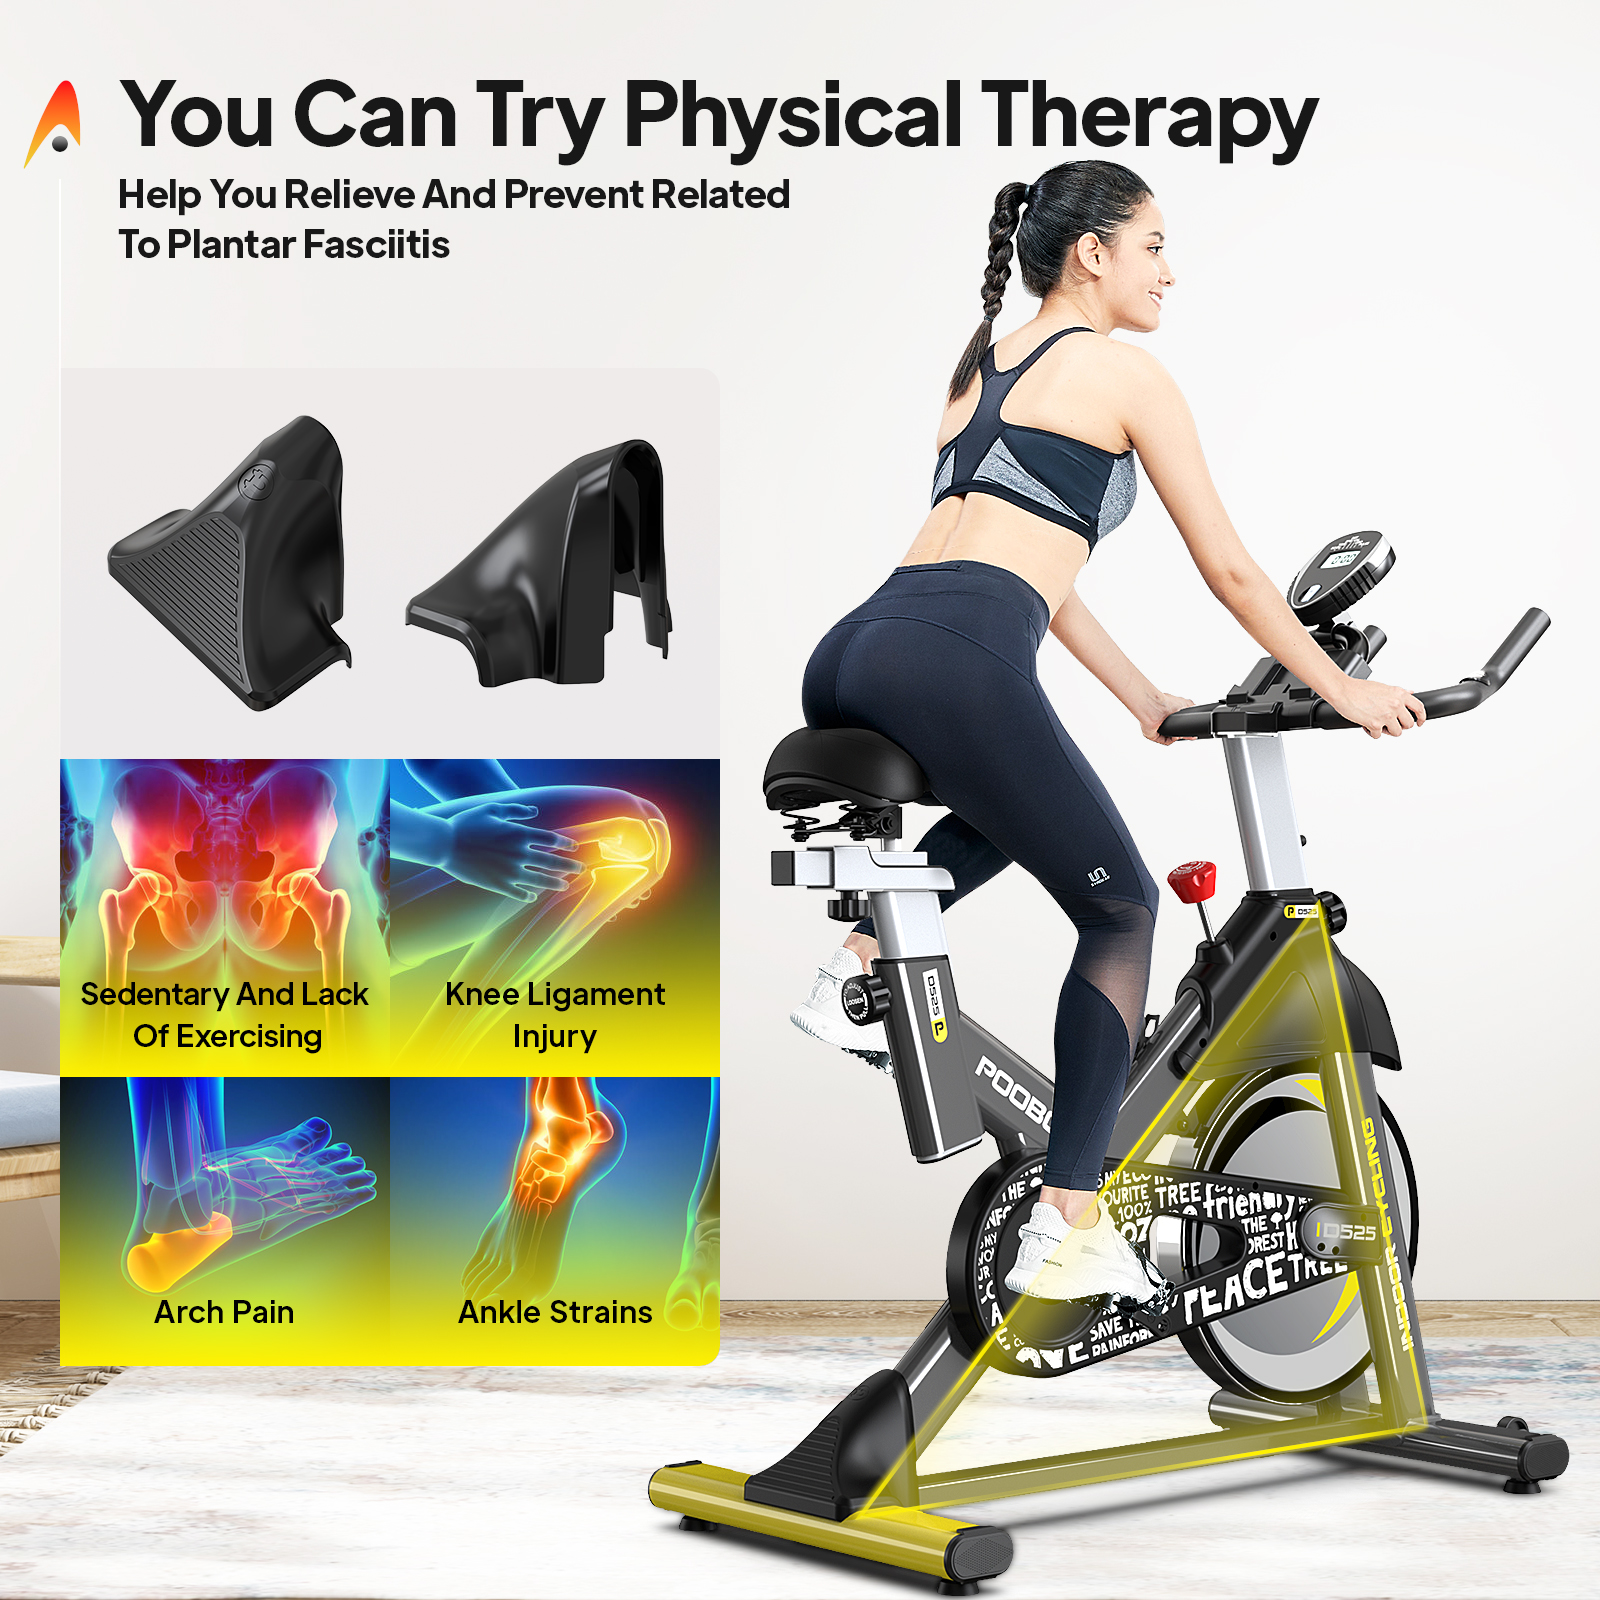 Pooboo Stationary Exercise bike Magnetic Resistance Cycling Bicycle with LCD Monitor for Indoor Cardio Workout 35 Lbs Flywheel Max Weight 330 Lbs - image 3 of 11